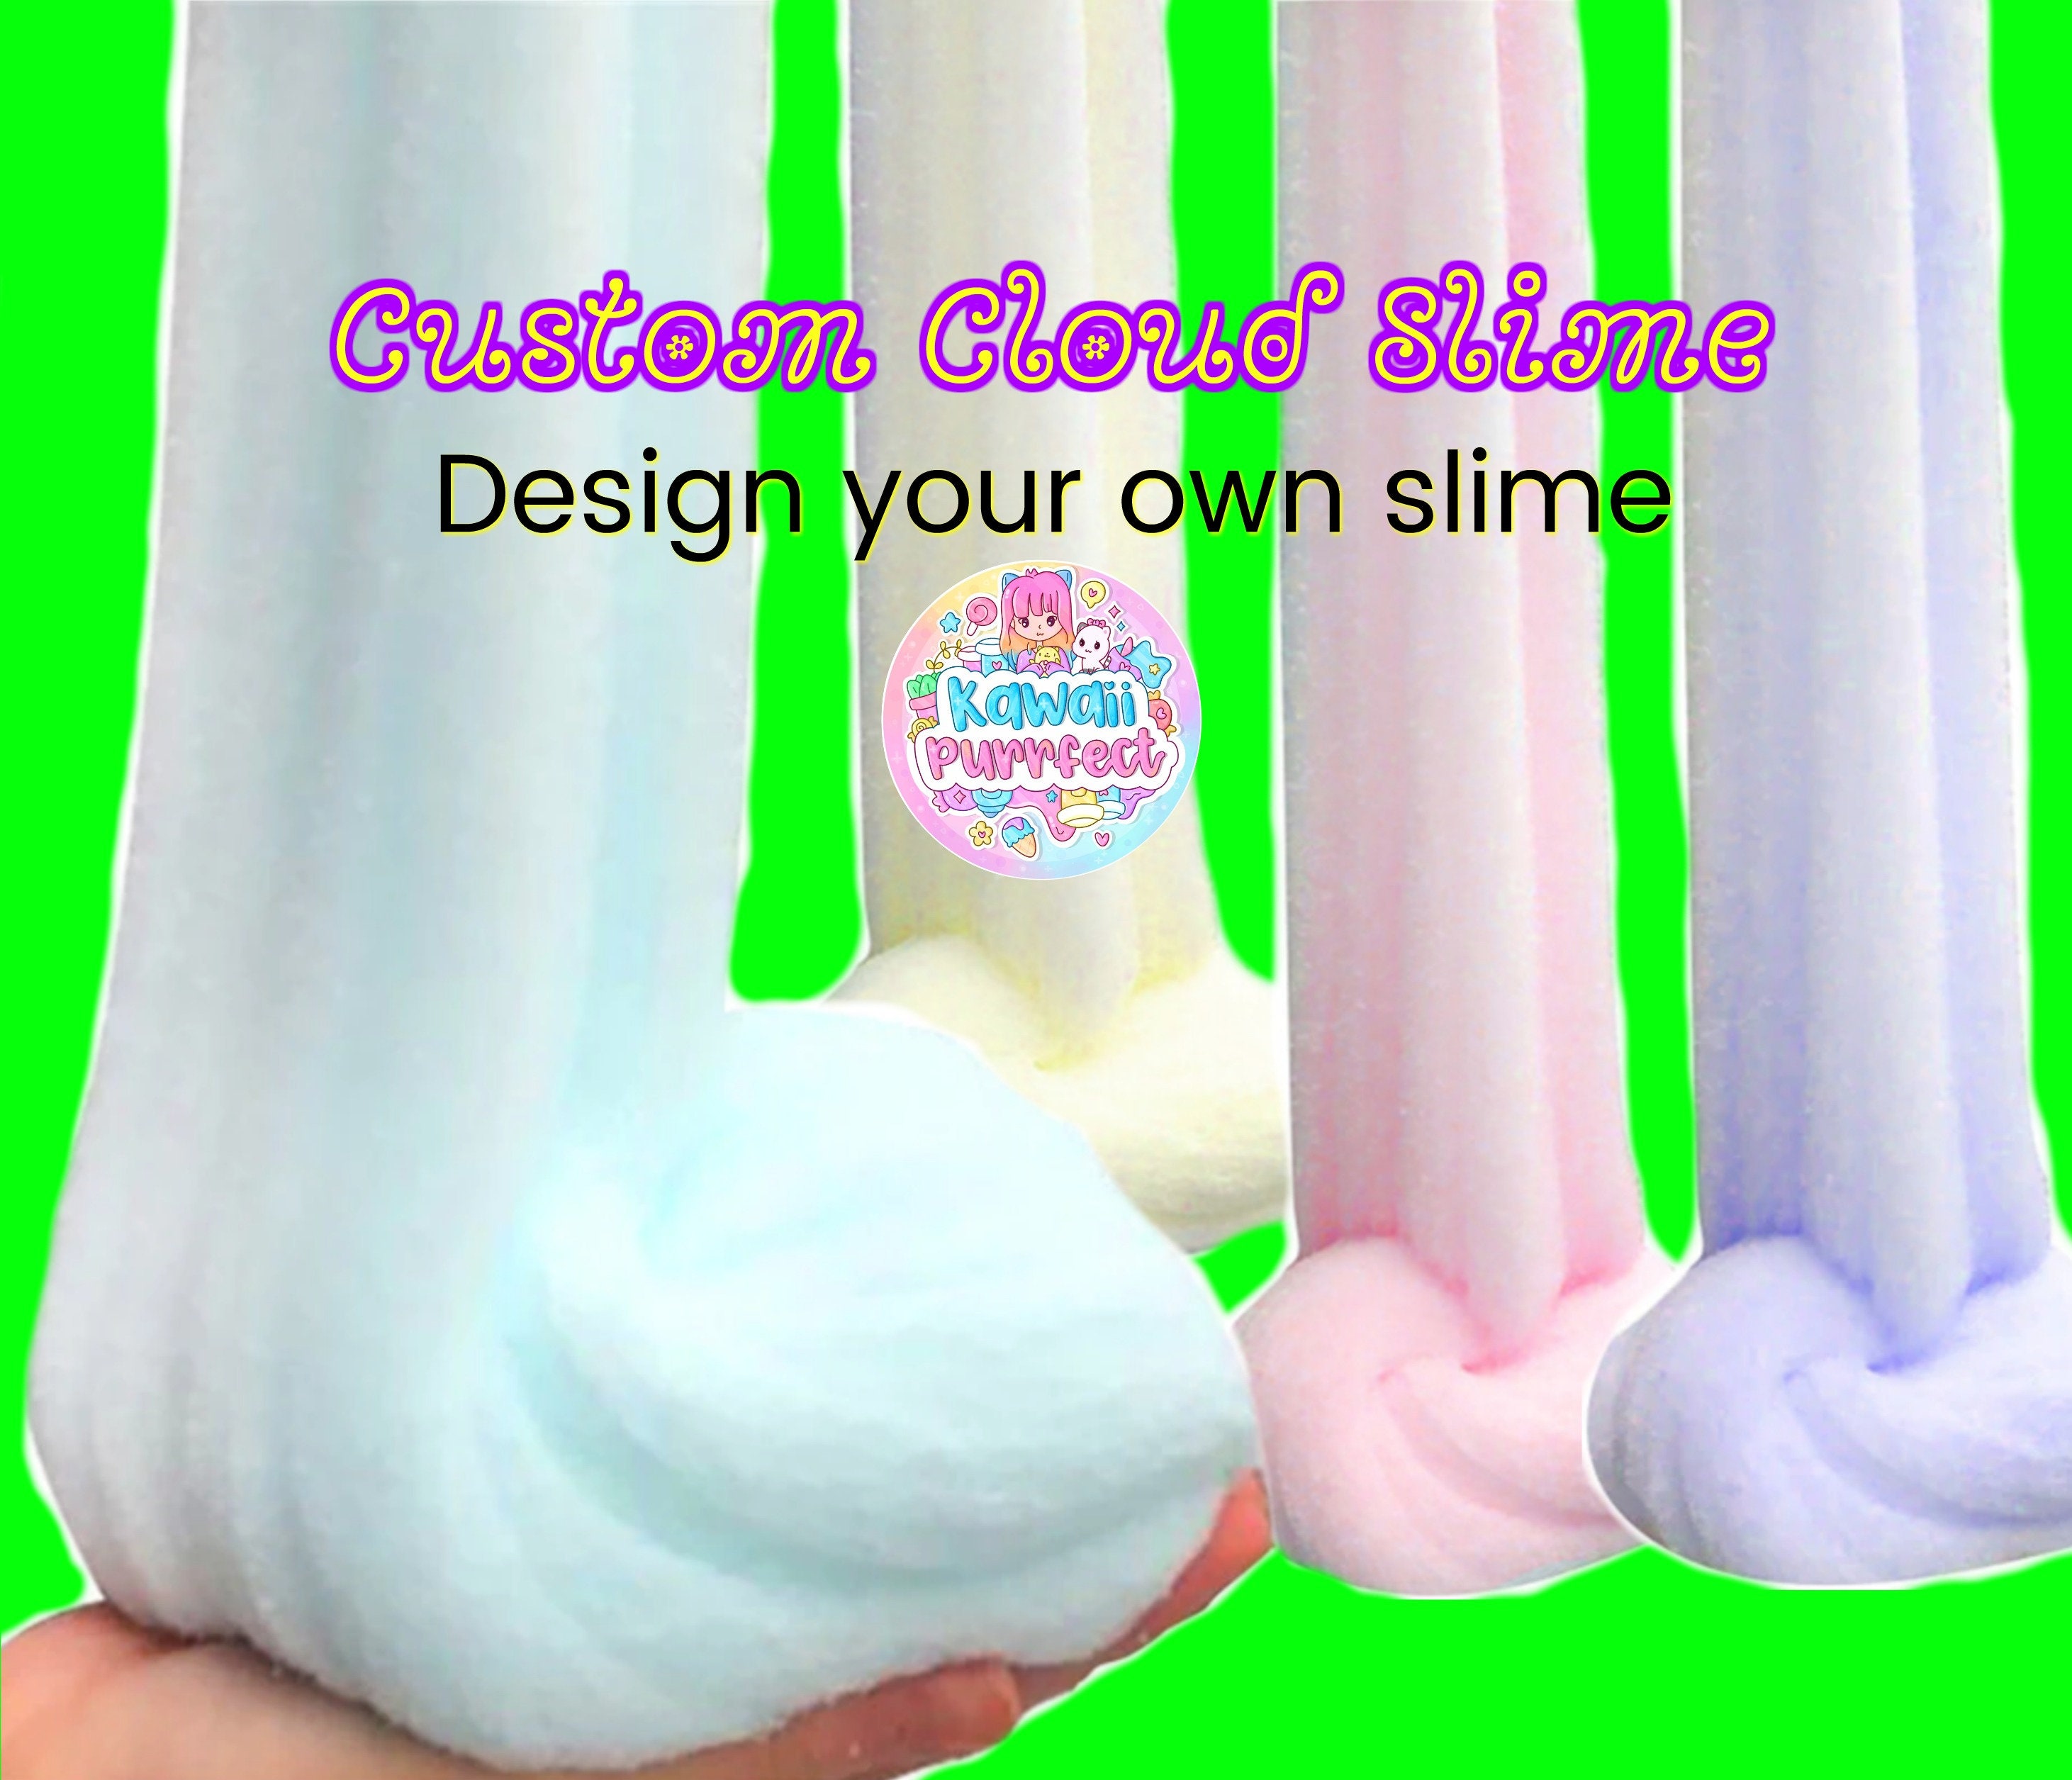 P & J Trading Slime Scents, Fragrance Oils, Slime Shop Supplies Make DIY  Scented Slime, Cosmetic Grade, Made in USA, Cotton Candy Scent BEST 